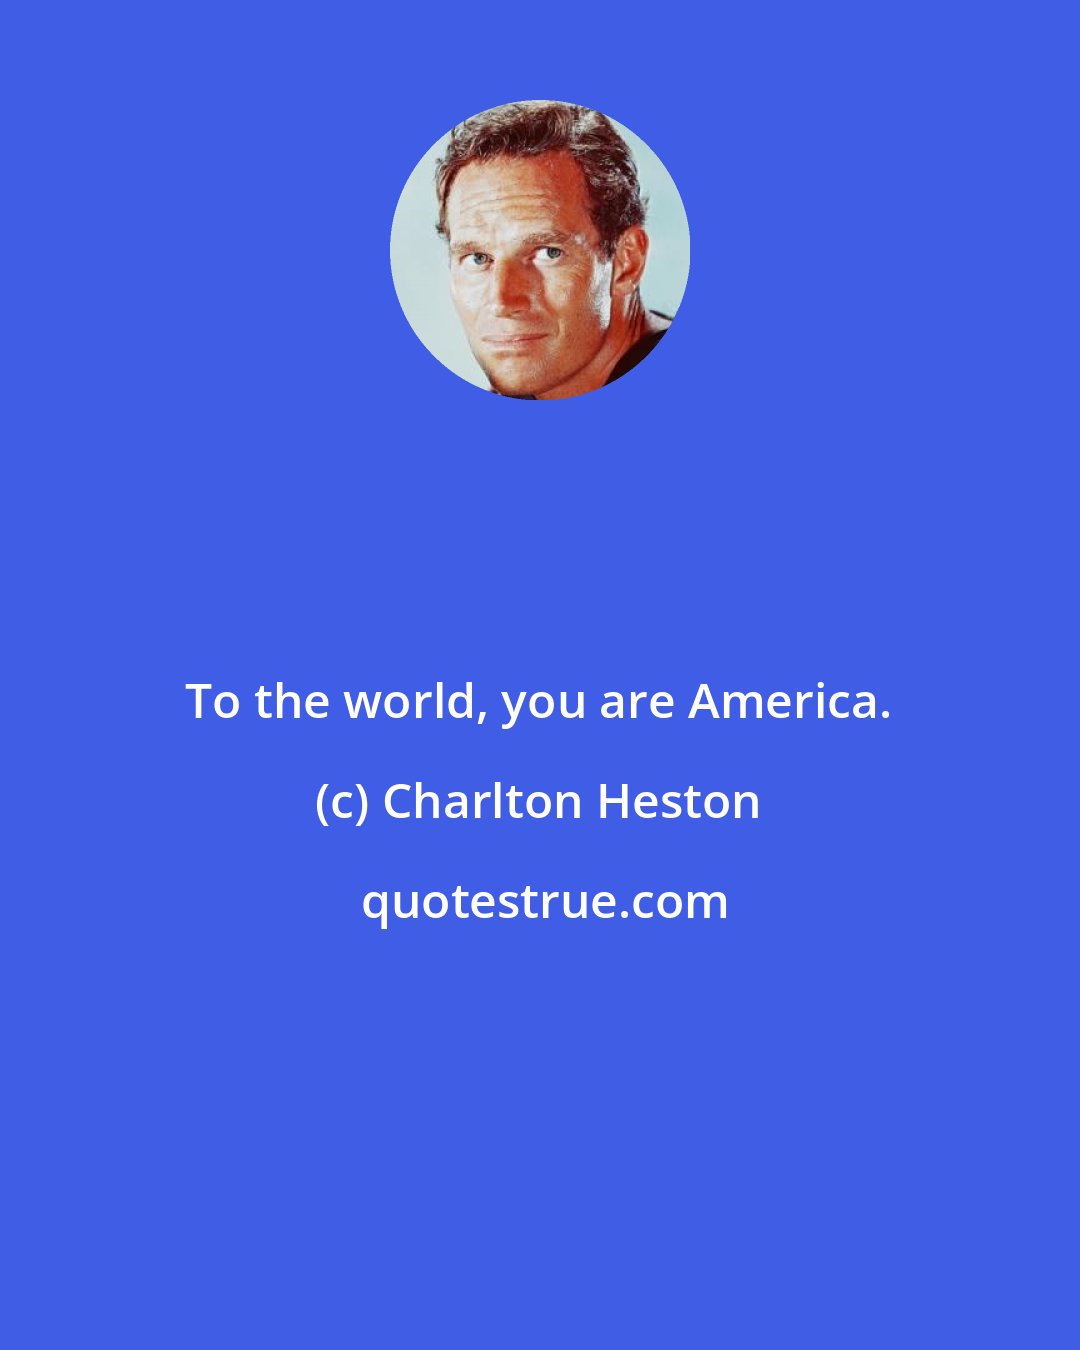 Charlton Heston: To the world, you are America.